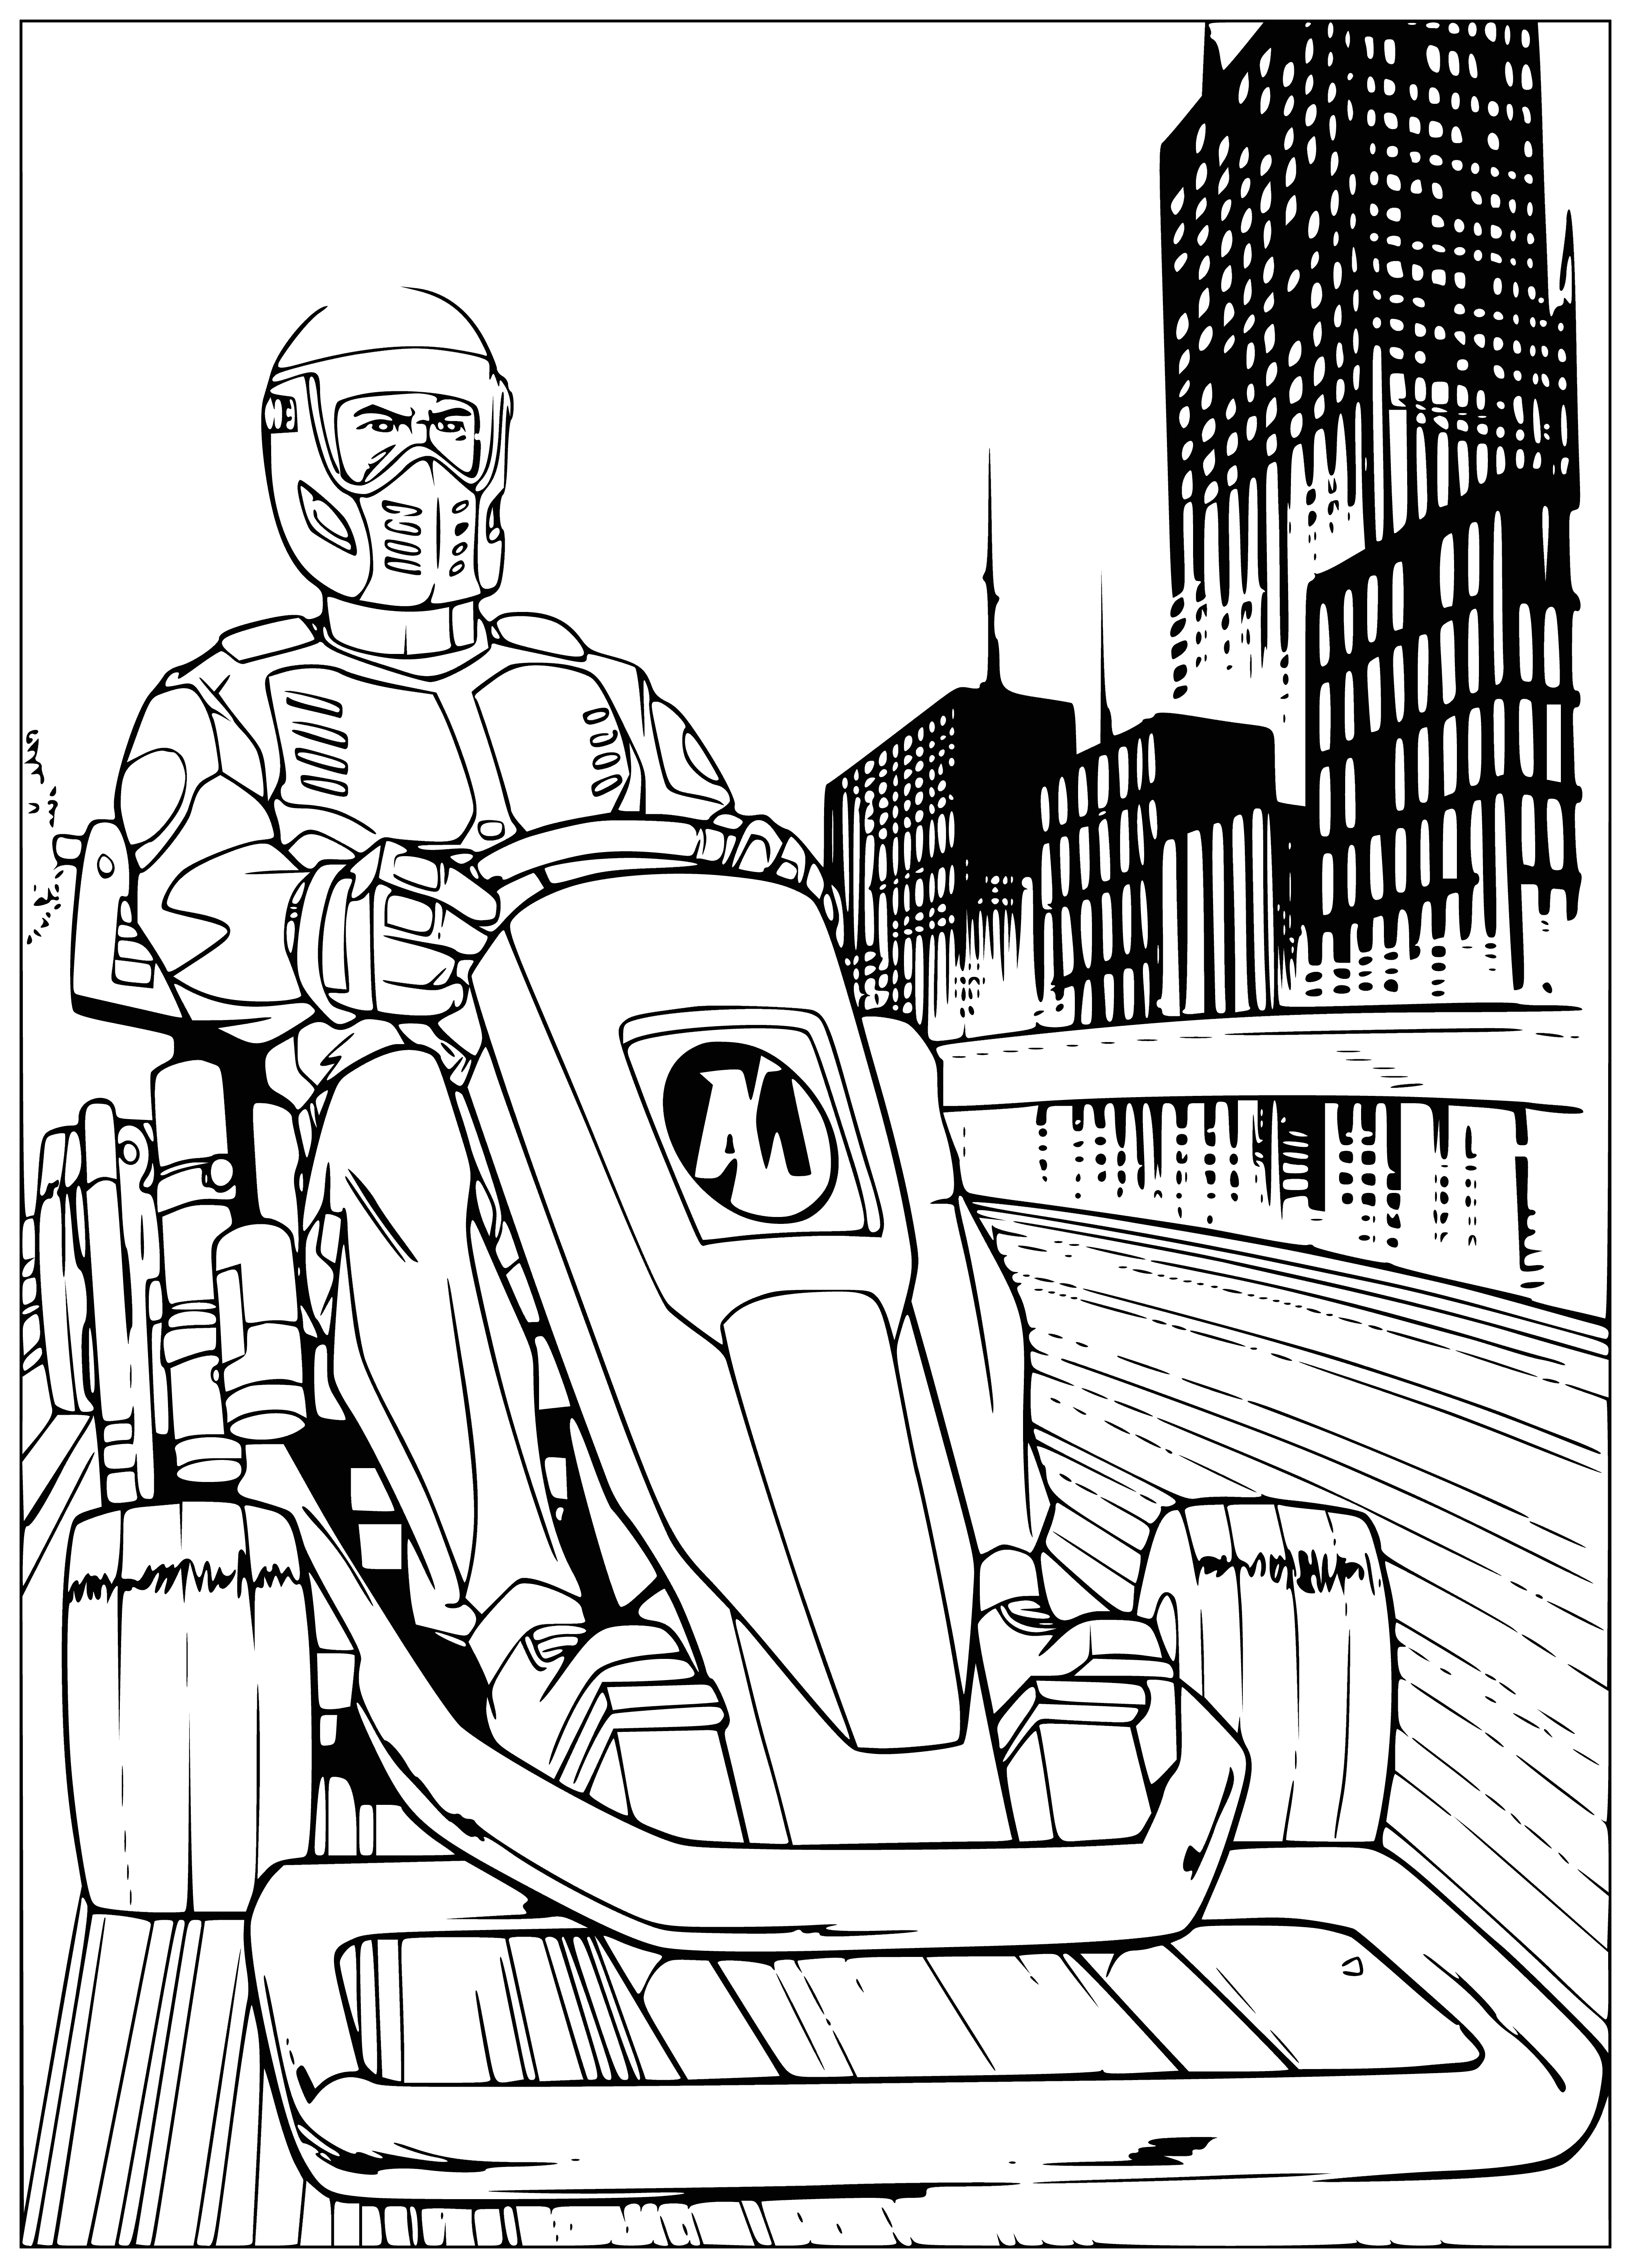 coloring page: ActionMan Kart: red car w/black stripe, 4 black tires, yellow windshield, removable top. Comes w/ActionMan figure.